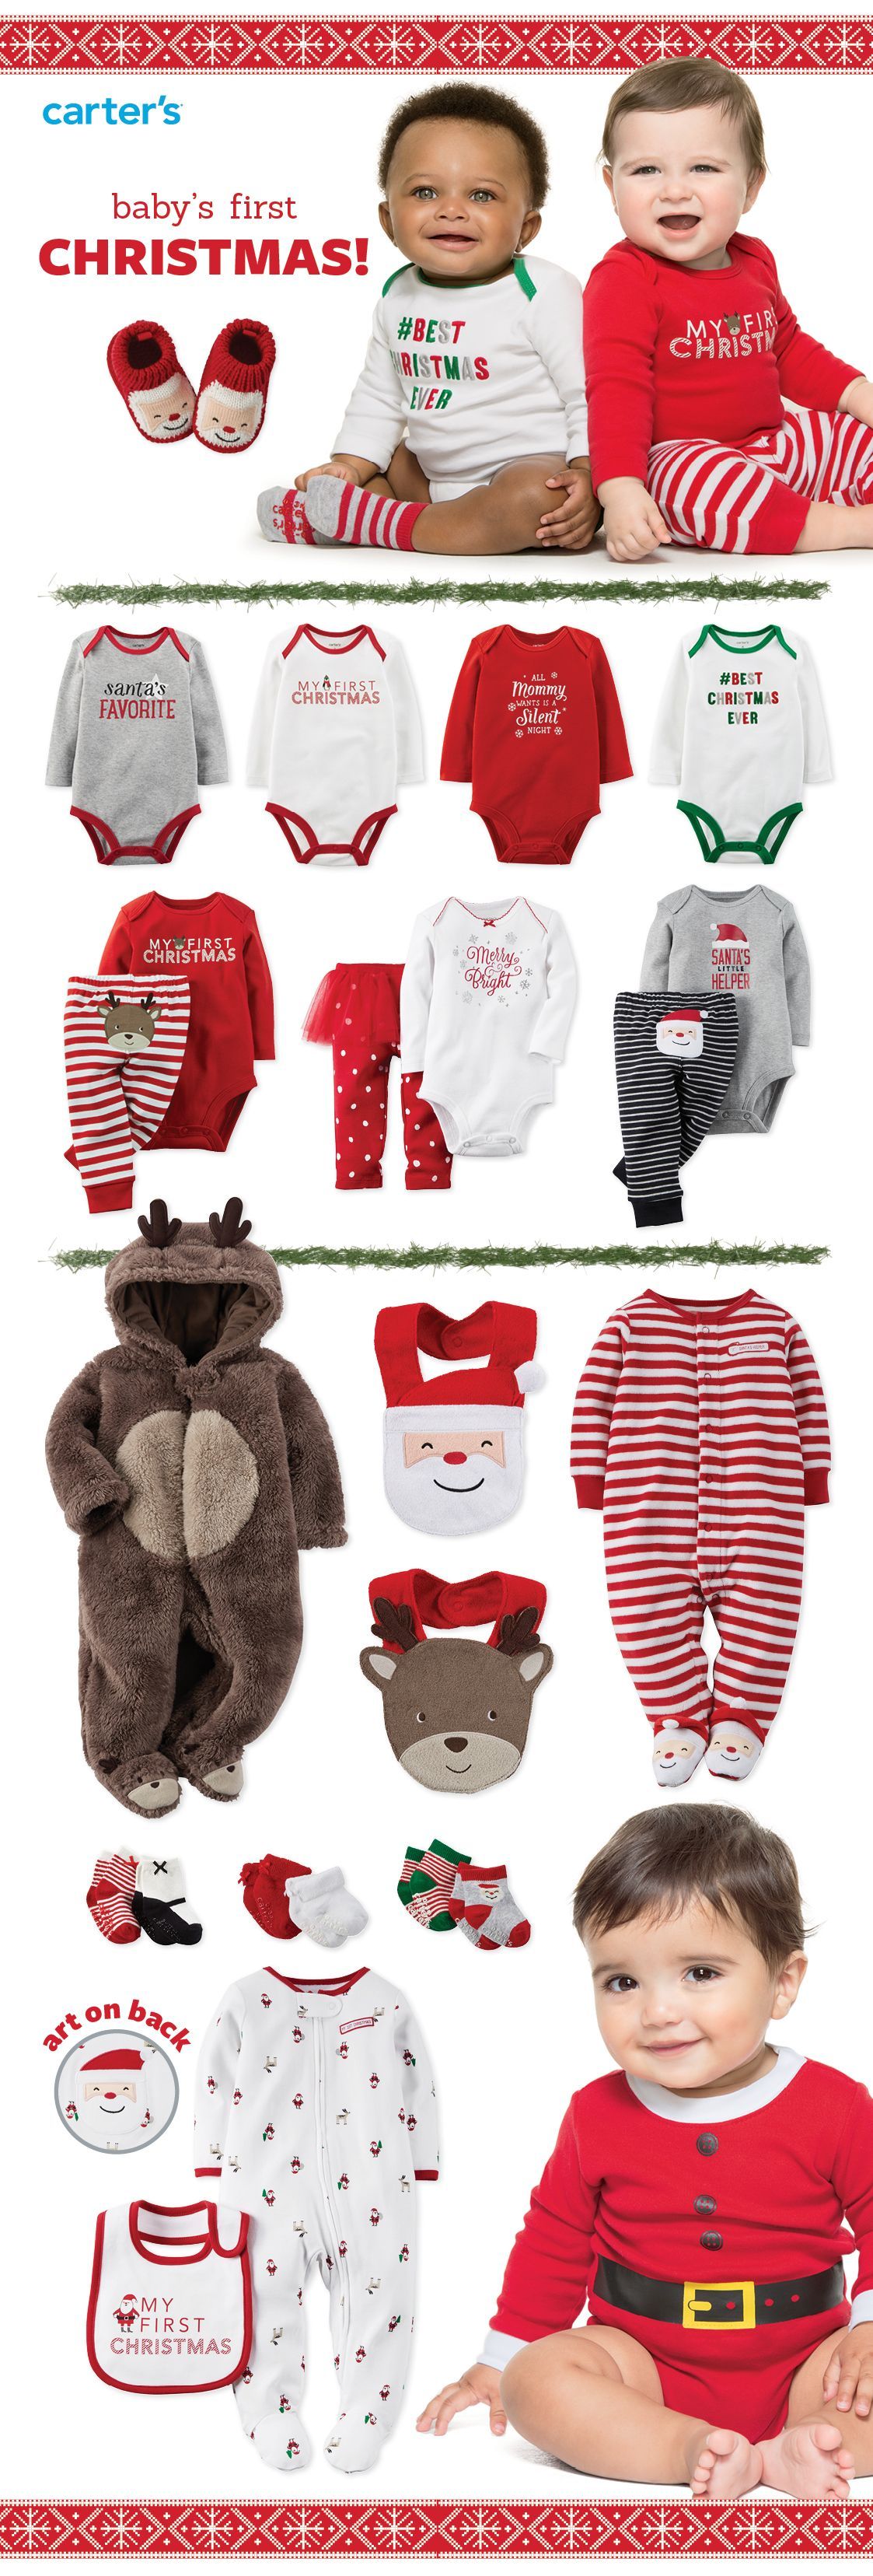 Your one-stop shop for baby’s first Christmas! Holiday bodysuits, Santa suits, sleep & play, sets & little extras. We’ve got